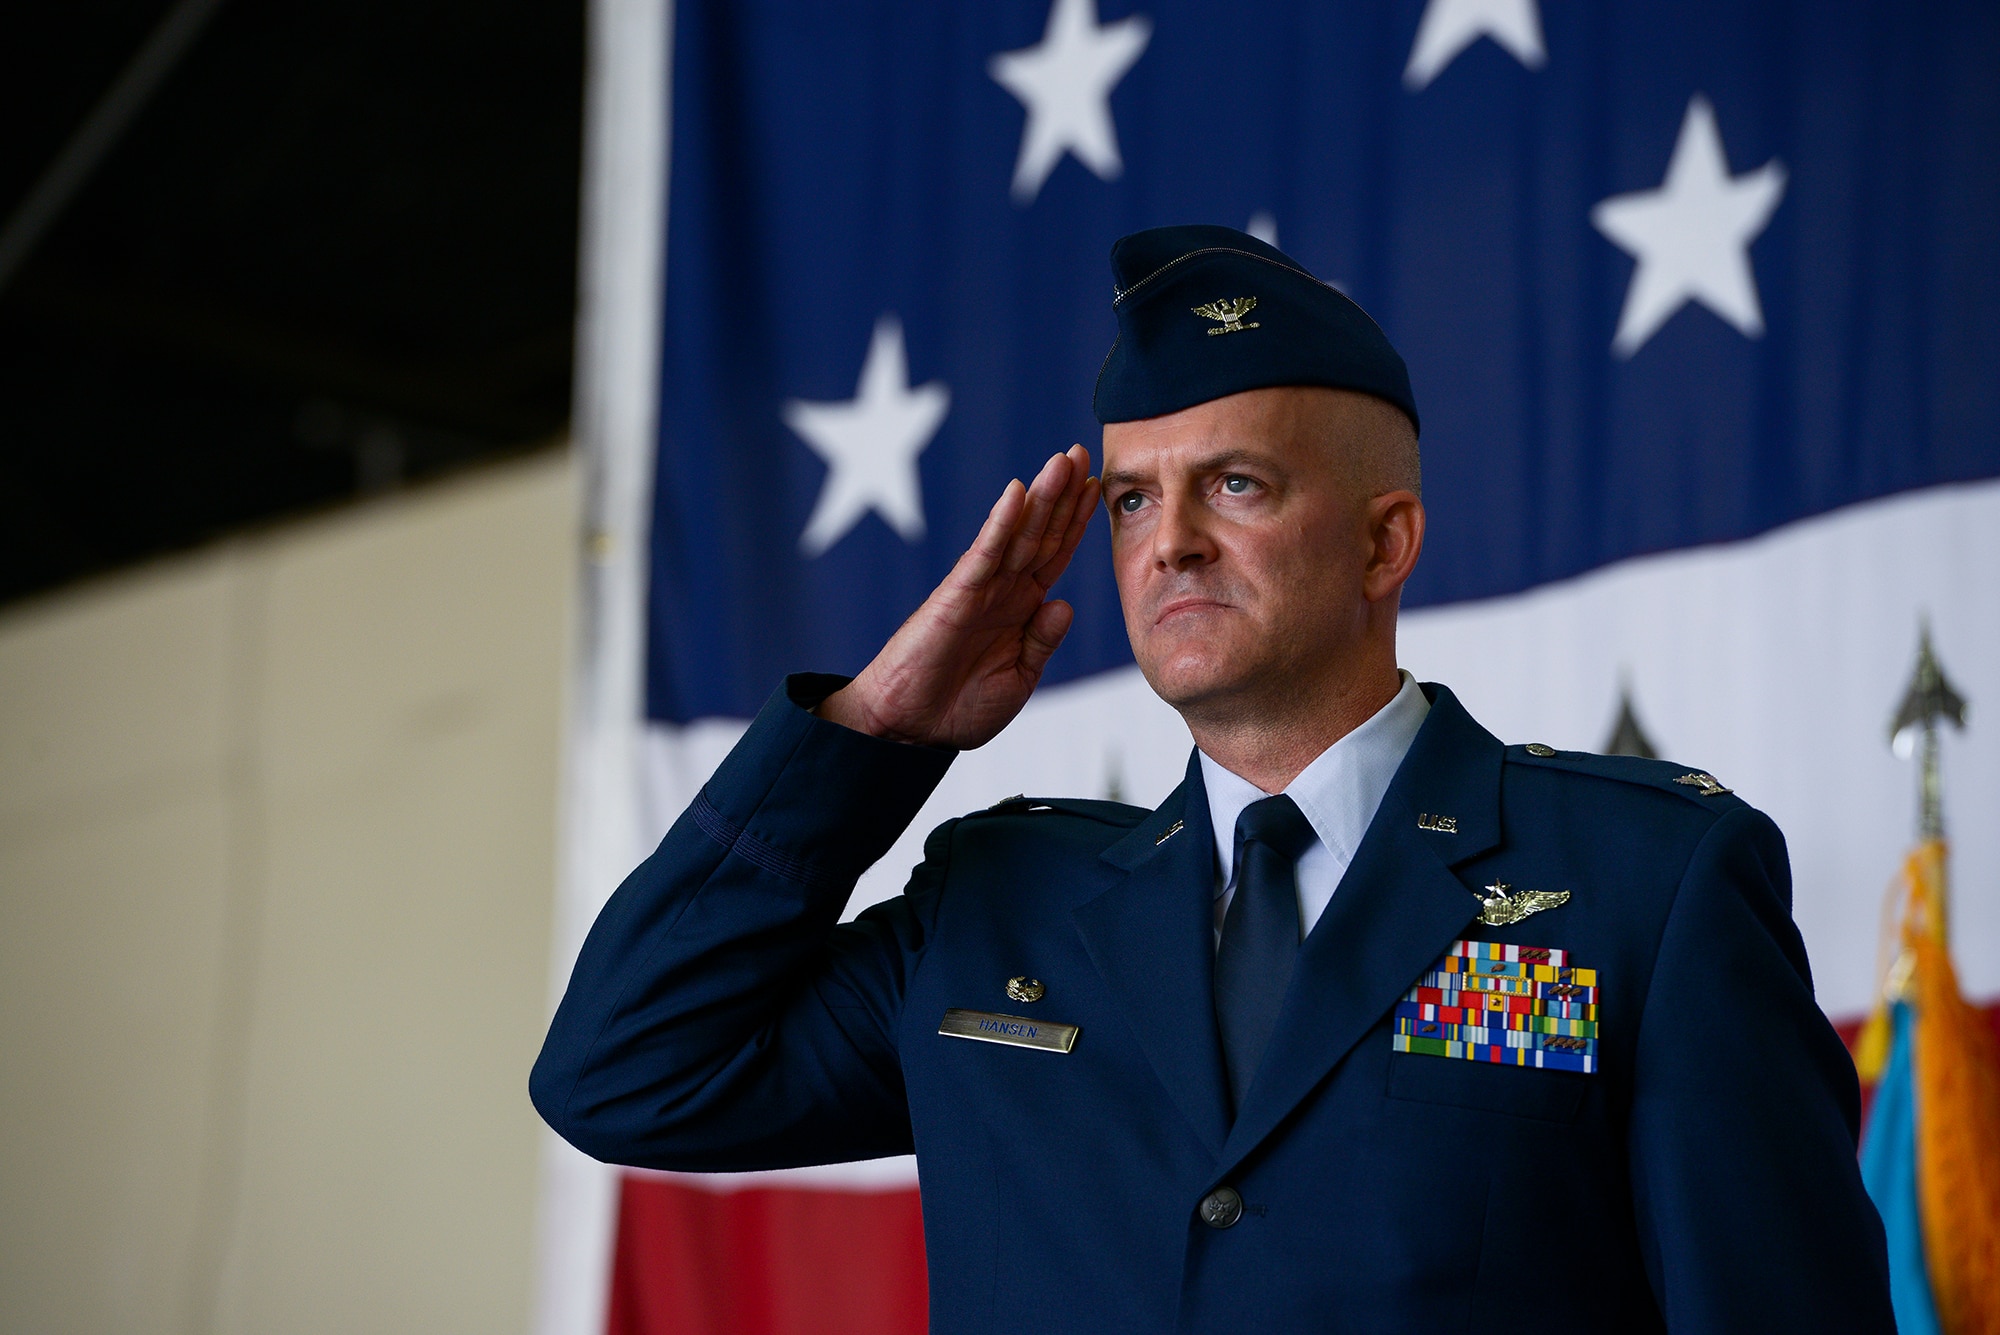 Col. Andrew Hansen, incoming 51st Fighter Wing commander, salutes the formation during the 51st FW change of command ceremony June 16, 2015, at Osan Air Base, Republic of Korea. Hansen is the 63rd commander in the wing's history. (U.S. Air Force photo by Staff Sgt. Jake Barreiro/Released)